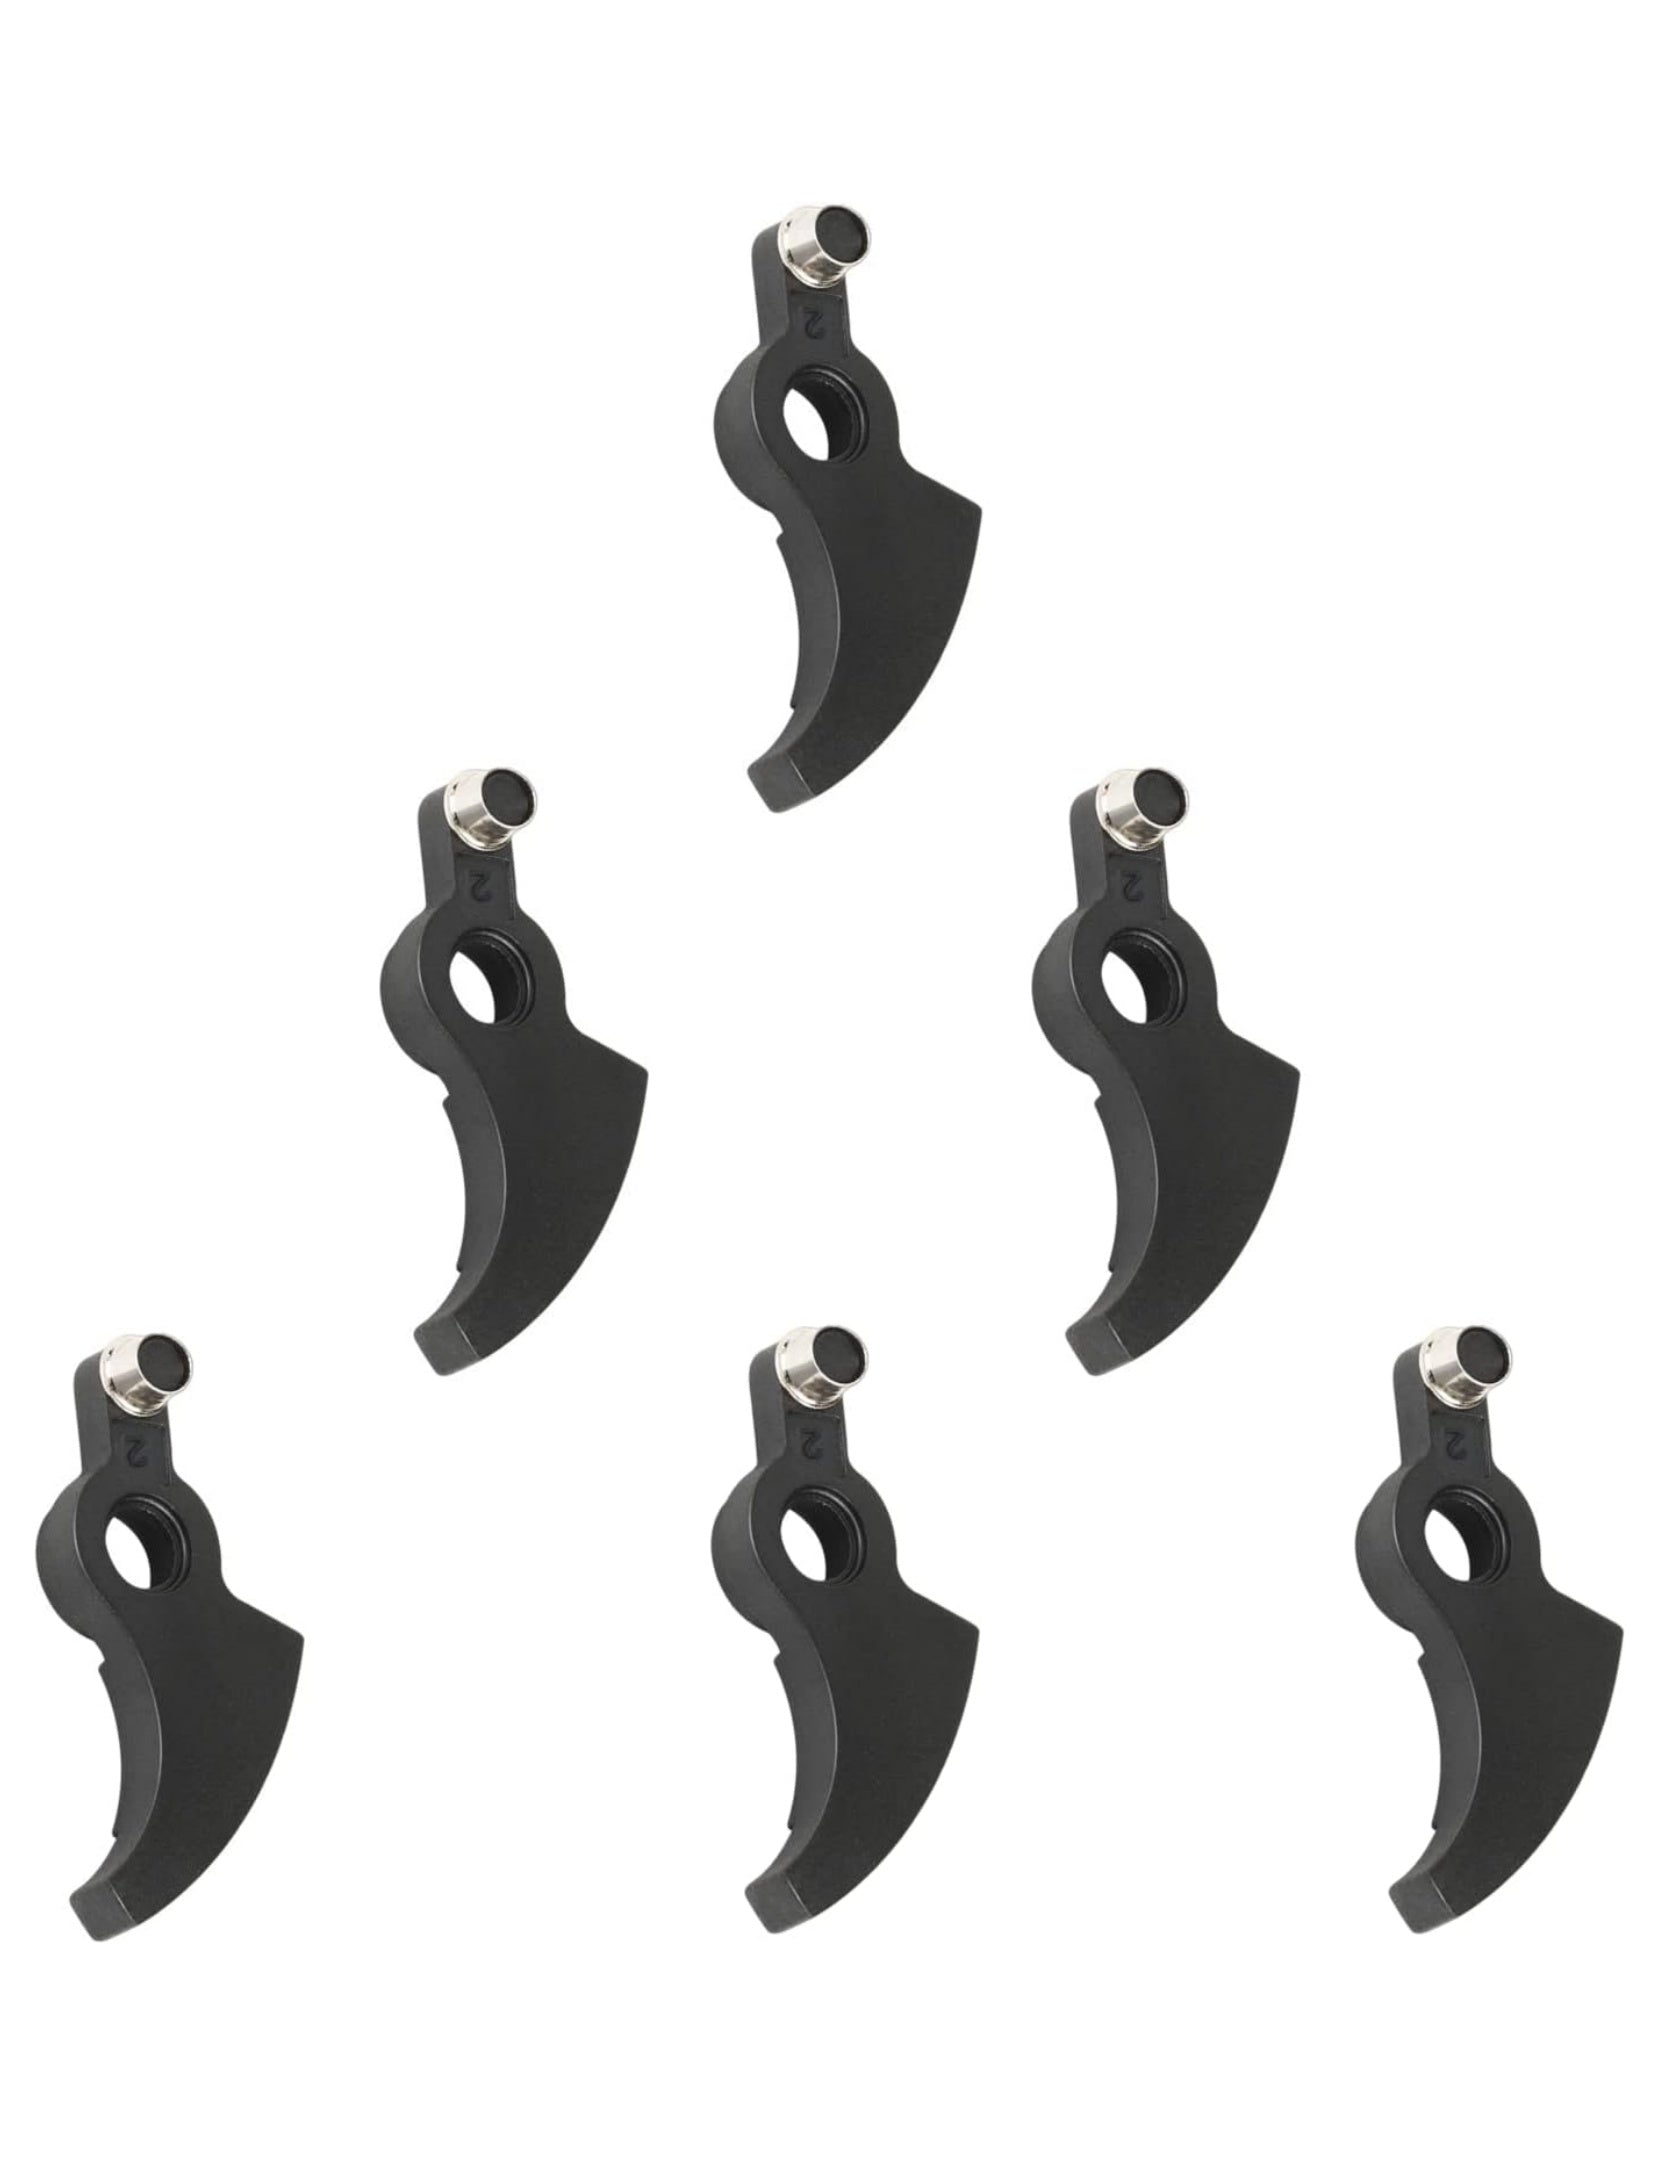 THTEN 90567079 Replacement String Trimmer Lever Compatible with Black & Decker GH610 Type 1, GH900 Type 1, GH900 Type 2,6 Pack